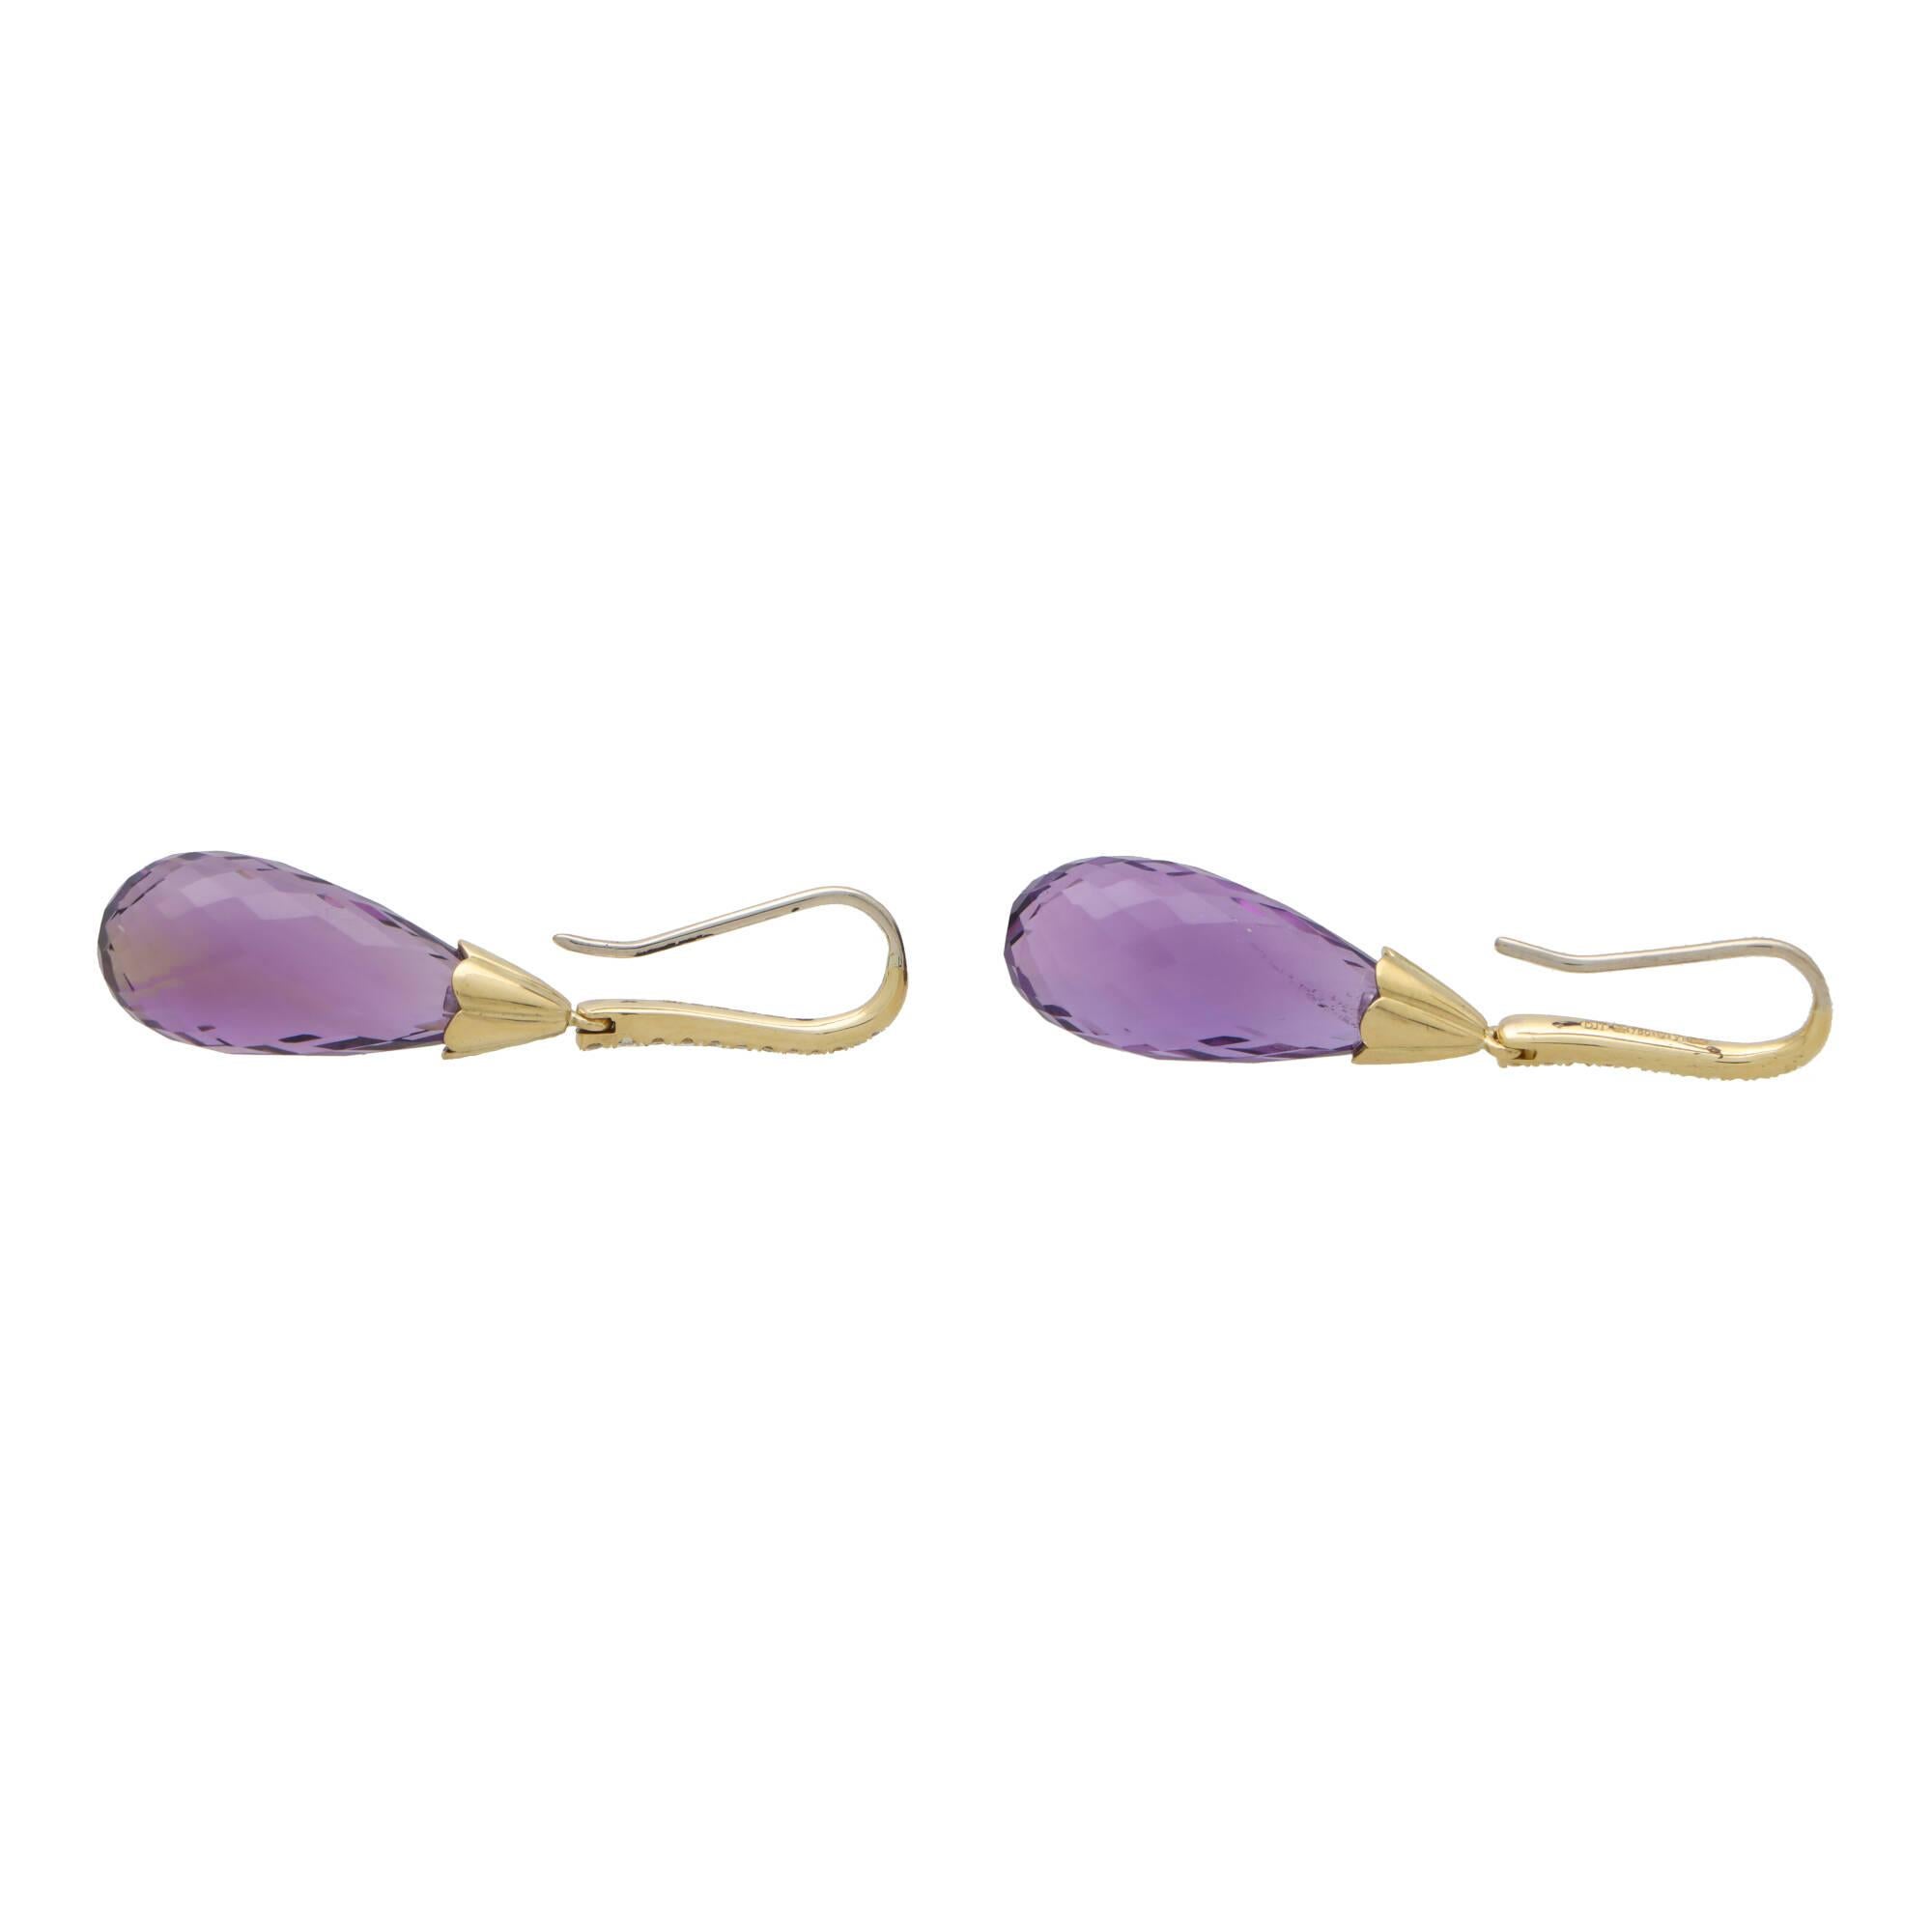 A beautiful pair of briolette amethyst and diamond drop earrings set in 18k yellow gold.

Each earring is firstly composed of a Sheppard hook fitting, set to the front with graduating round brilliant cut diamonds. Hanging from each hook is a